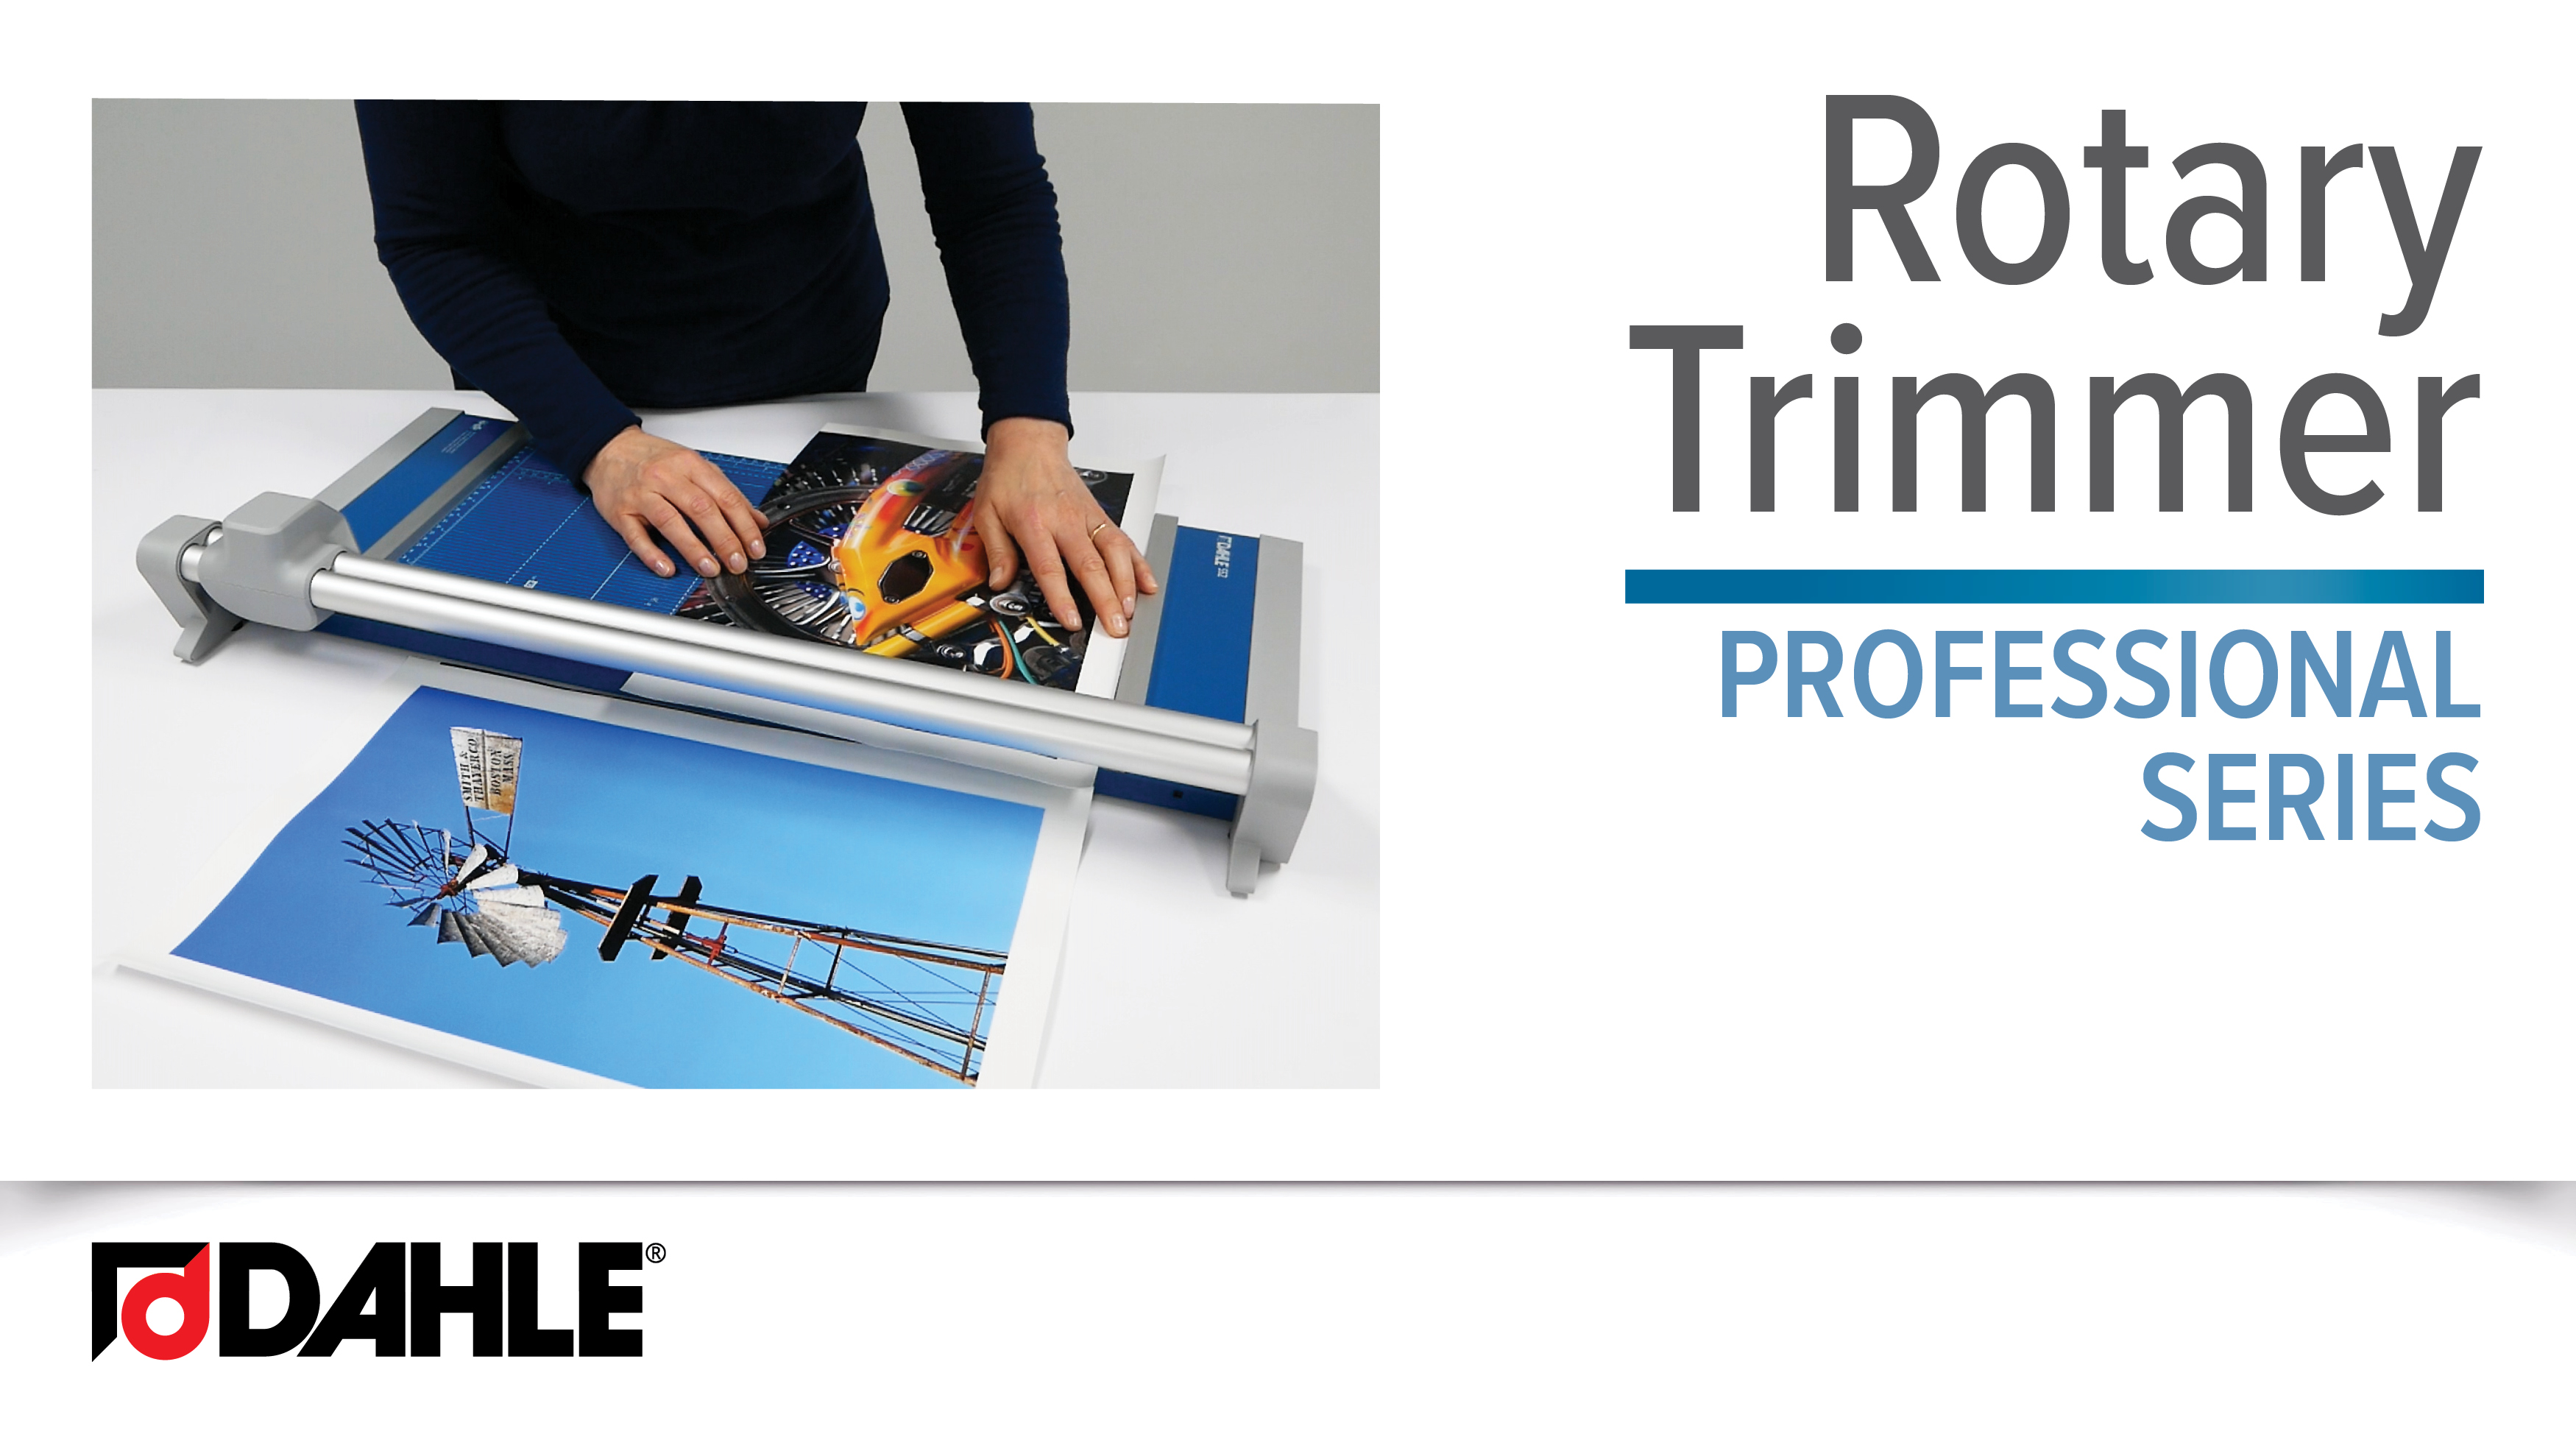 Dahle Professional Rotary Trimmer Series Video